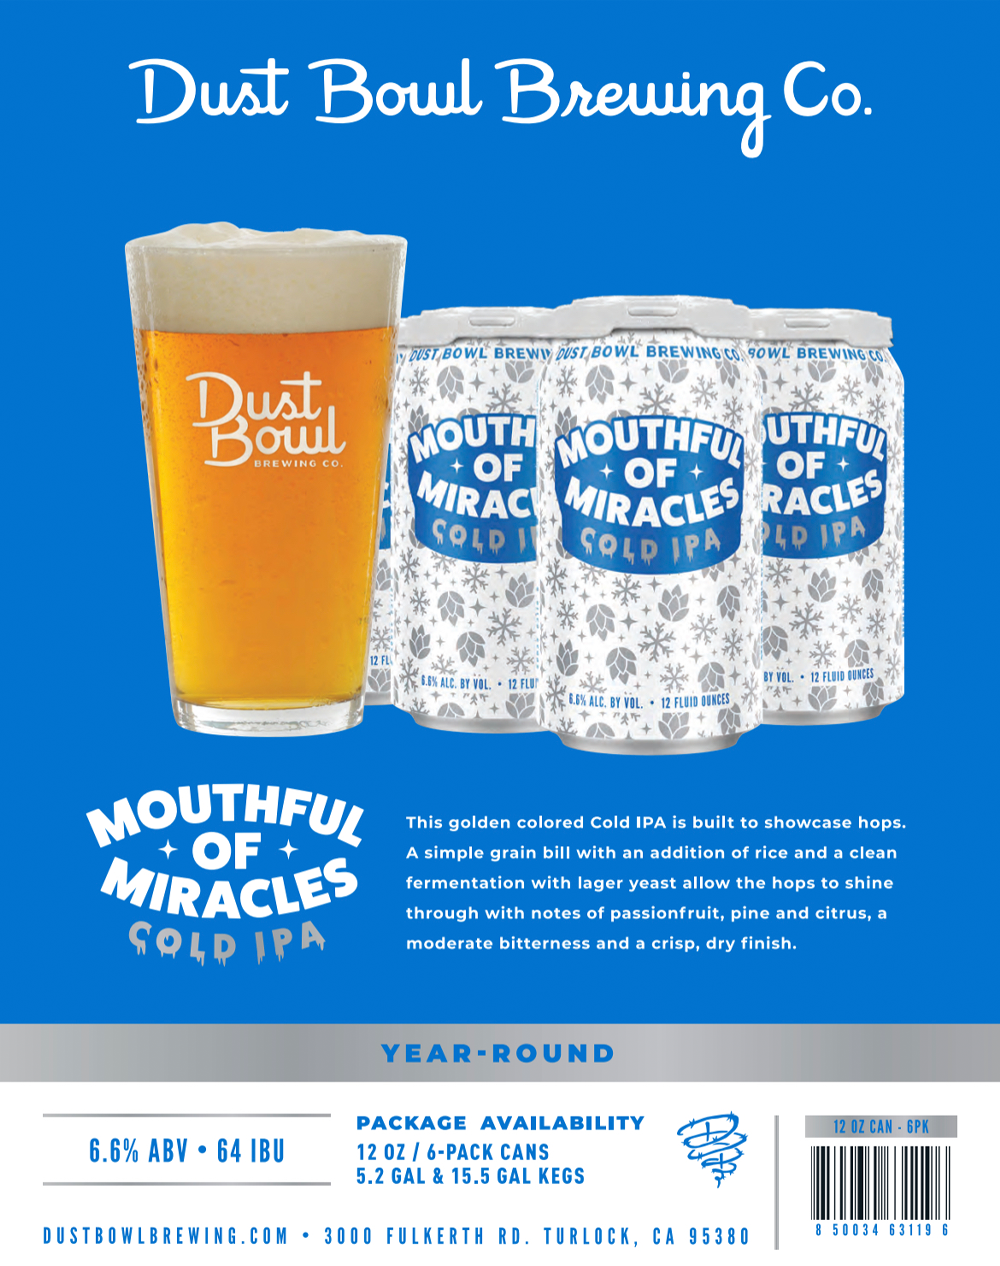 Mouthful of Miracles Cold IPA from Dust Bowl Brewing Company